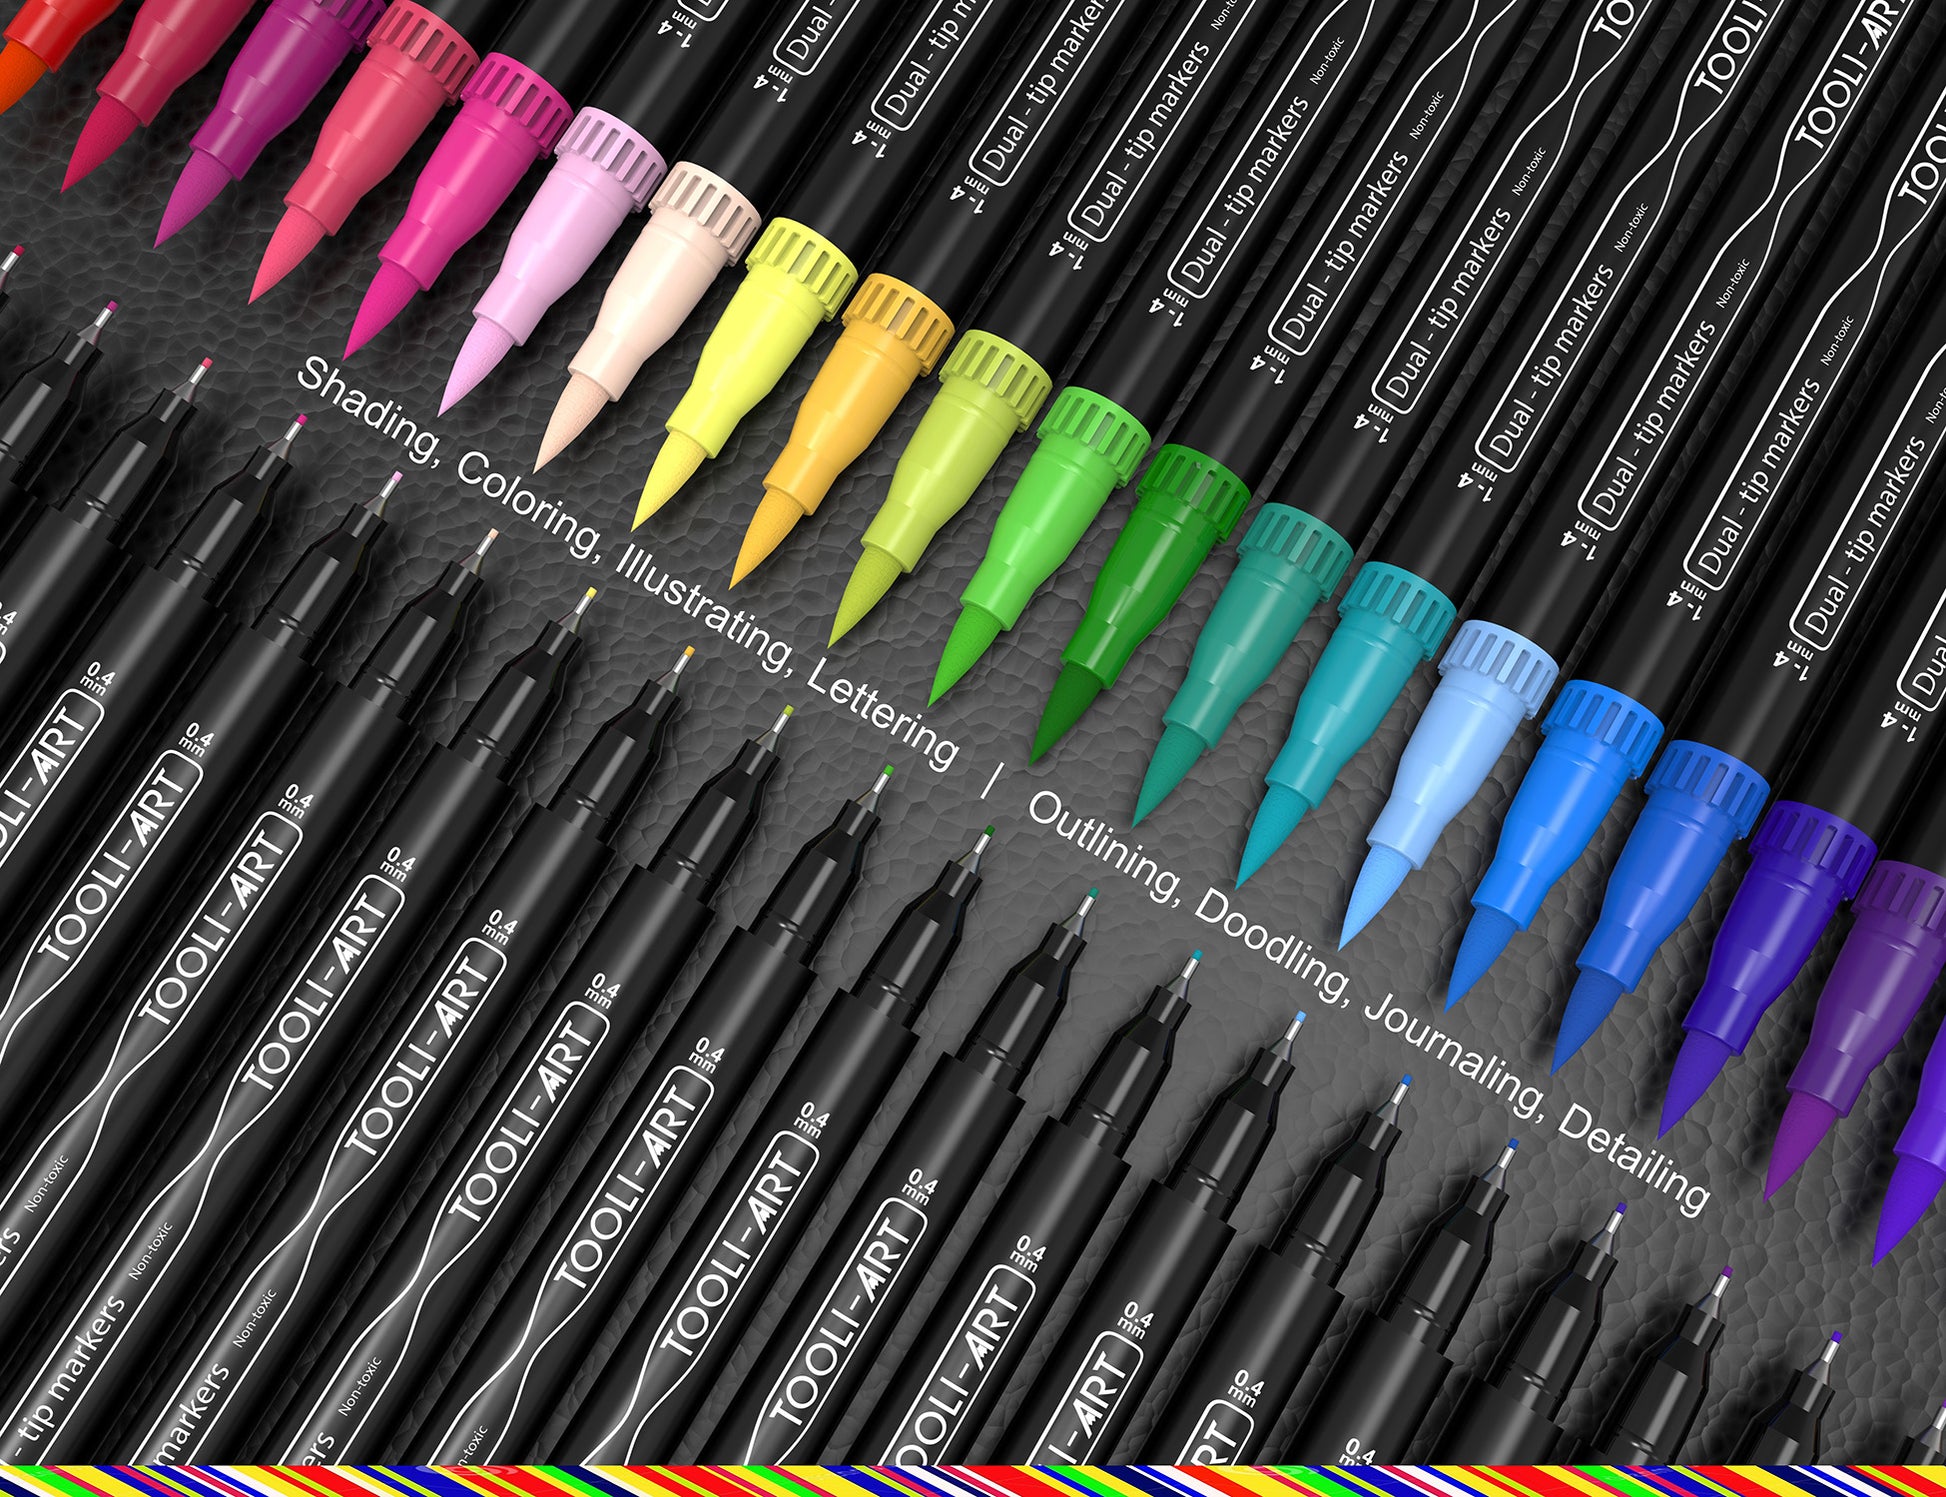 Yisan Dual Tip Brush Marker Pens,36 Colors Drawing Pens,Art Pens Fine Point Colored Journal Pens for Artists,70771